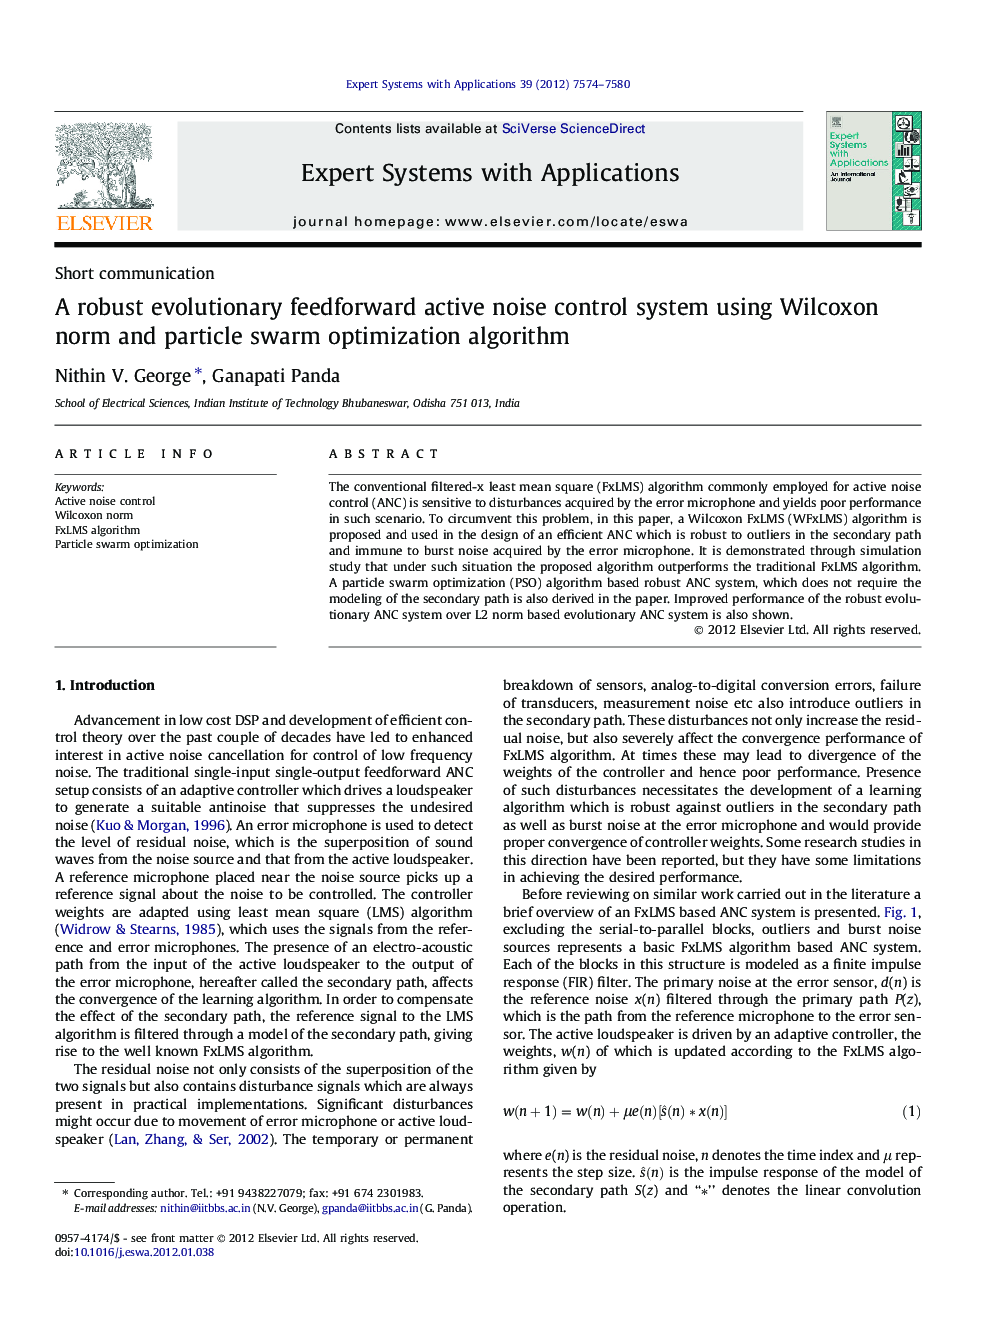 A robust evolutionary feedforward active noise control system using Wilcoxon norm and particle swarm optimization algorithm